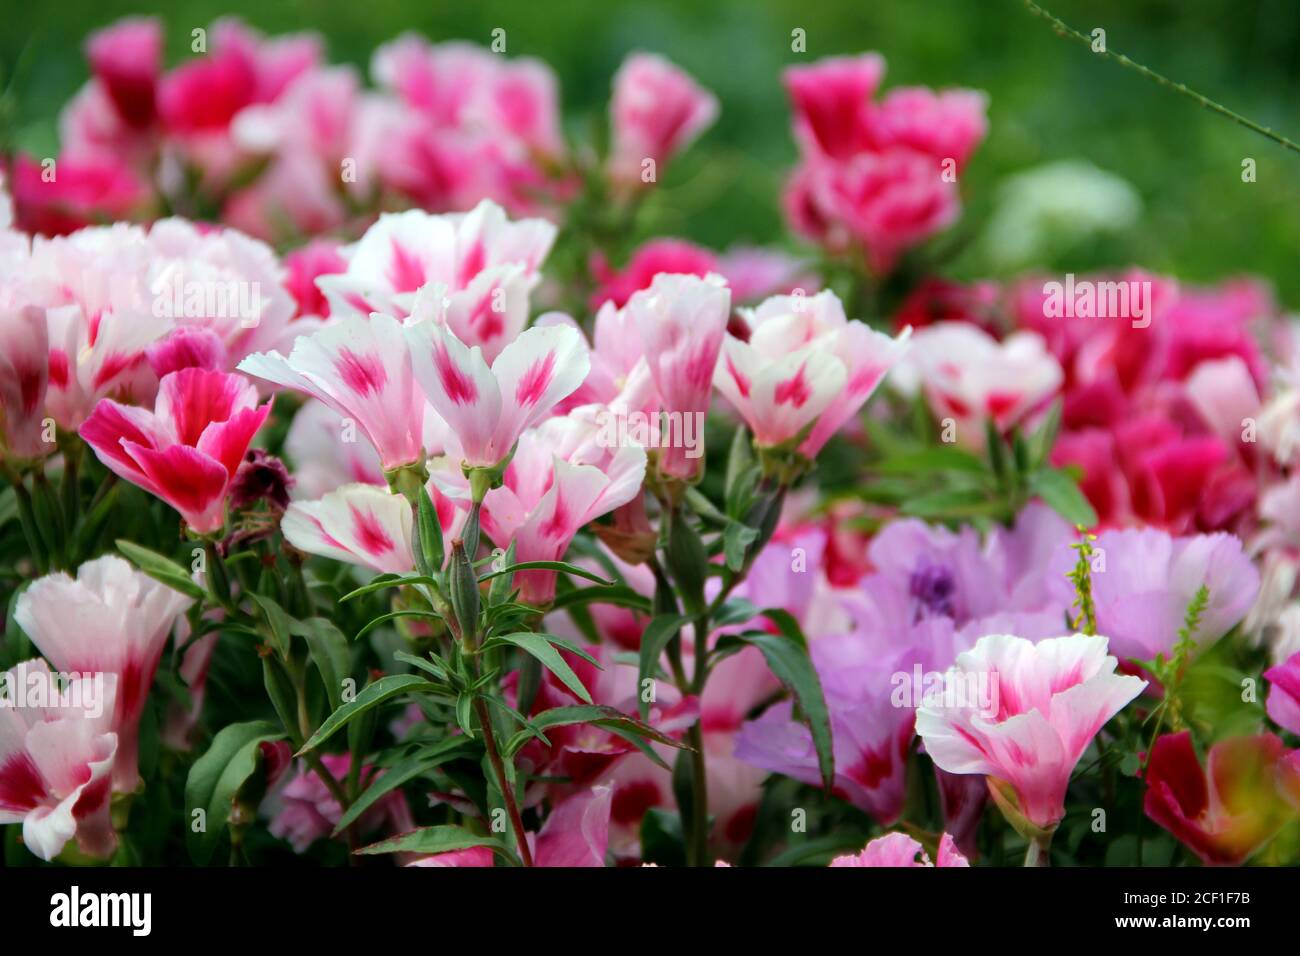 Soft focus of colorful godetia flowers blooming at a garden Stock Photo